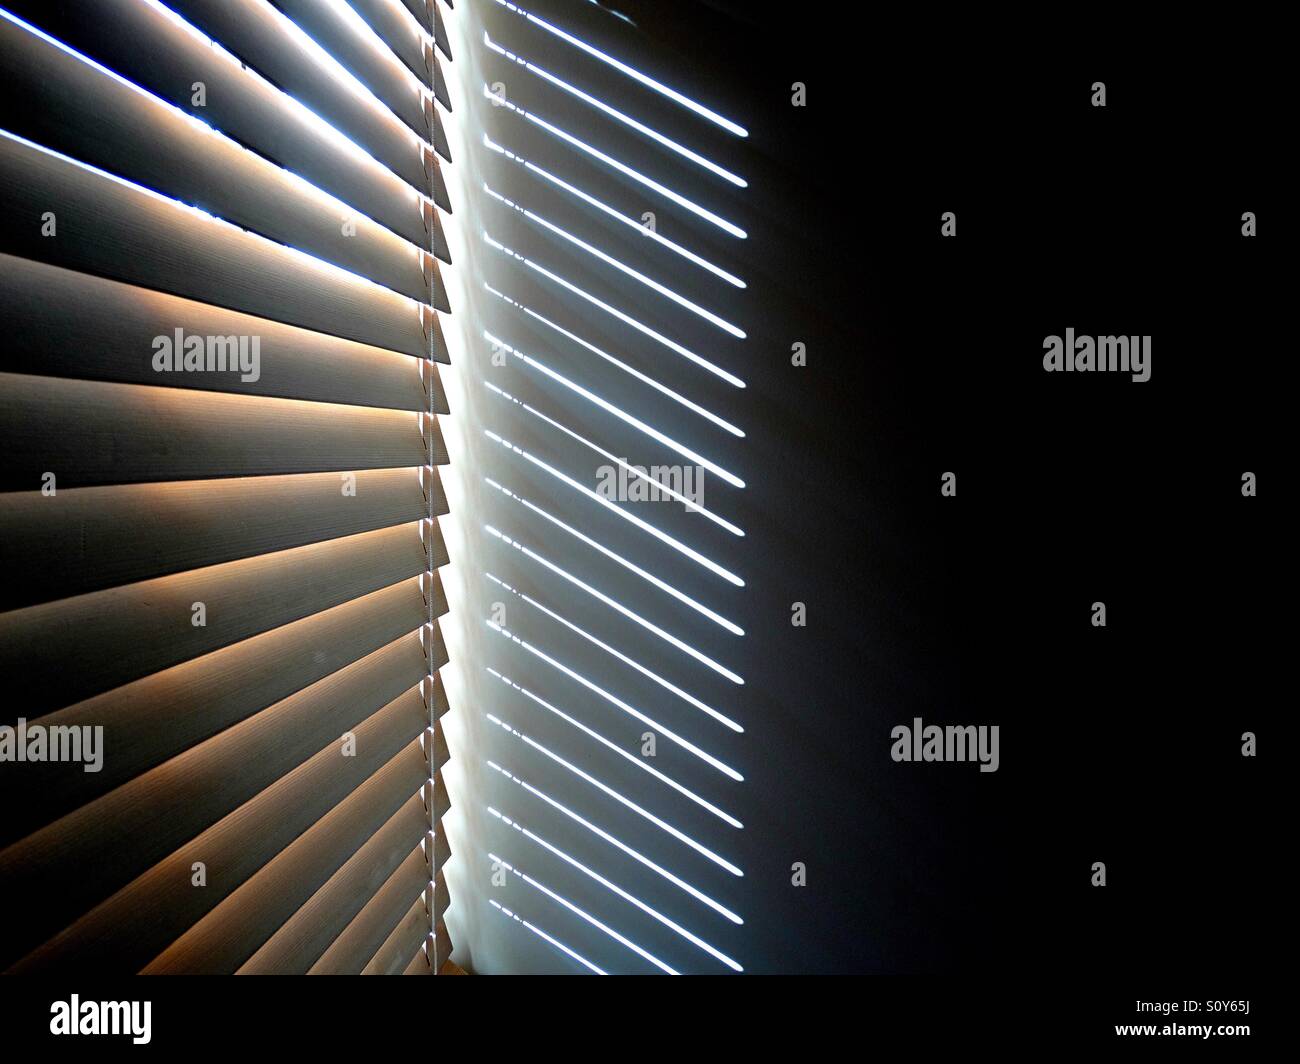 Abstract photo of shadows cast by a venetian blind Stock Photo